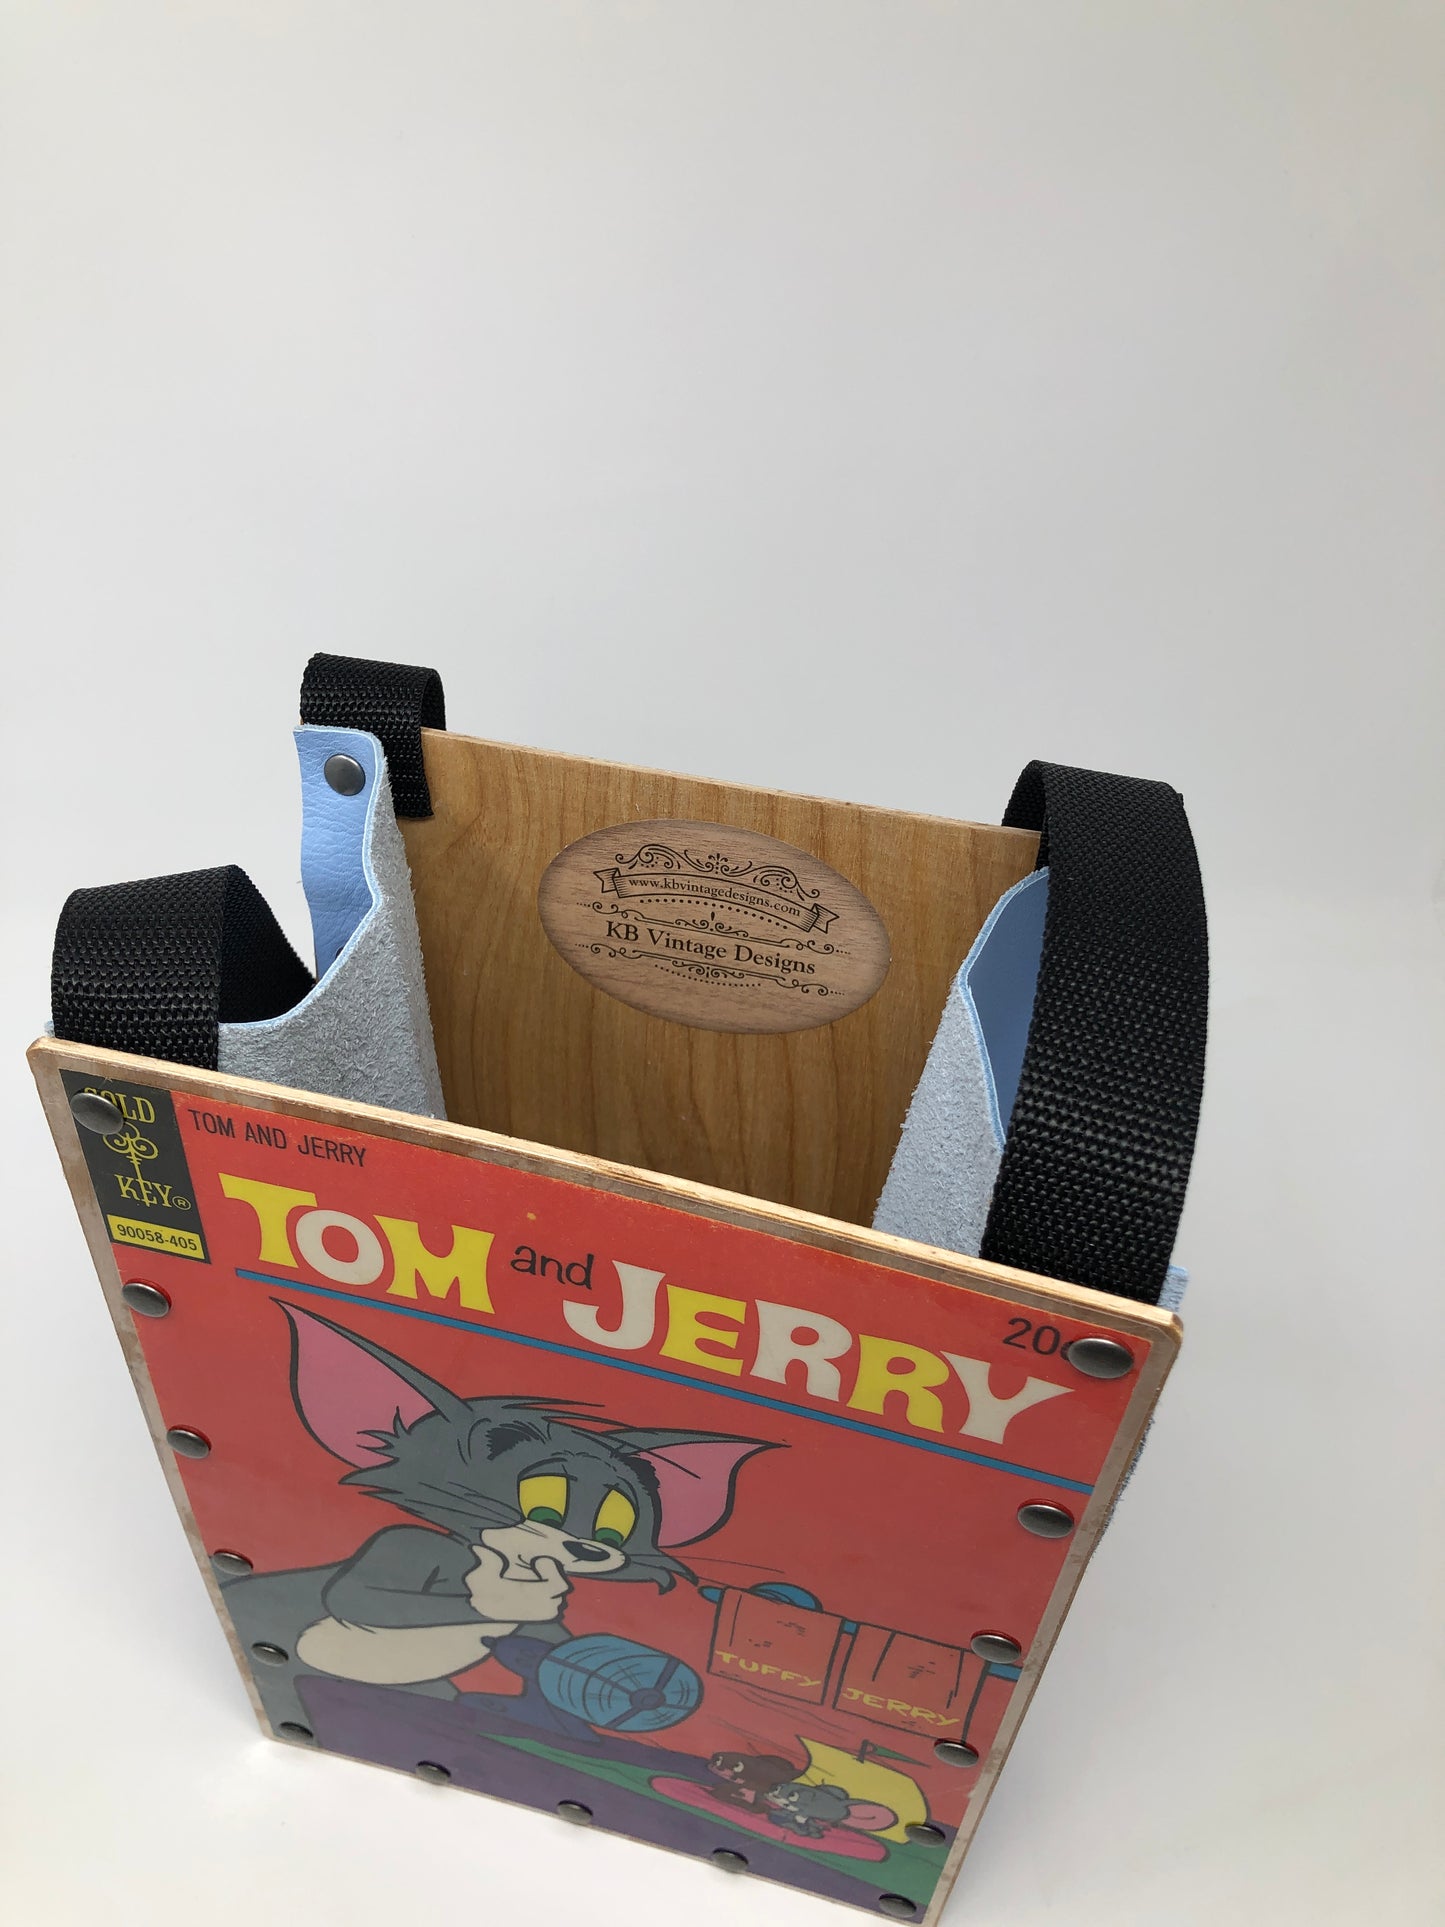 Vintage Gold Key Cartoon Comic Book Purse - Tom and Jerry May 1974